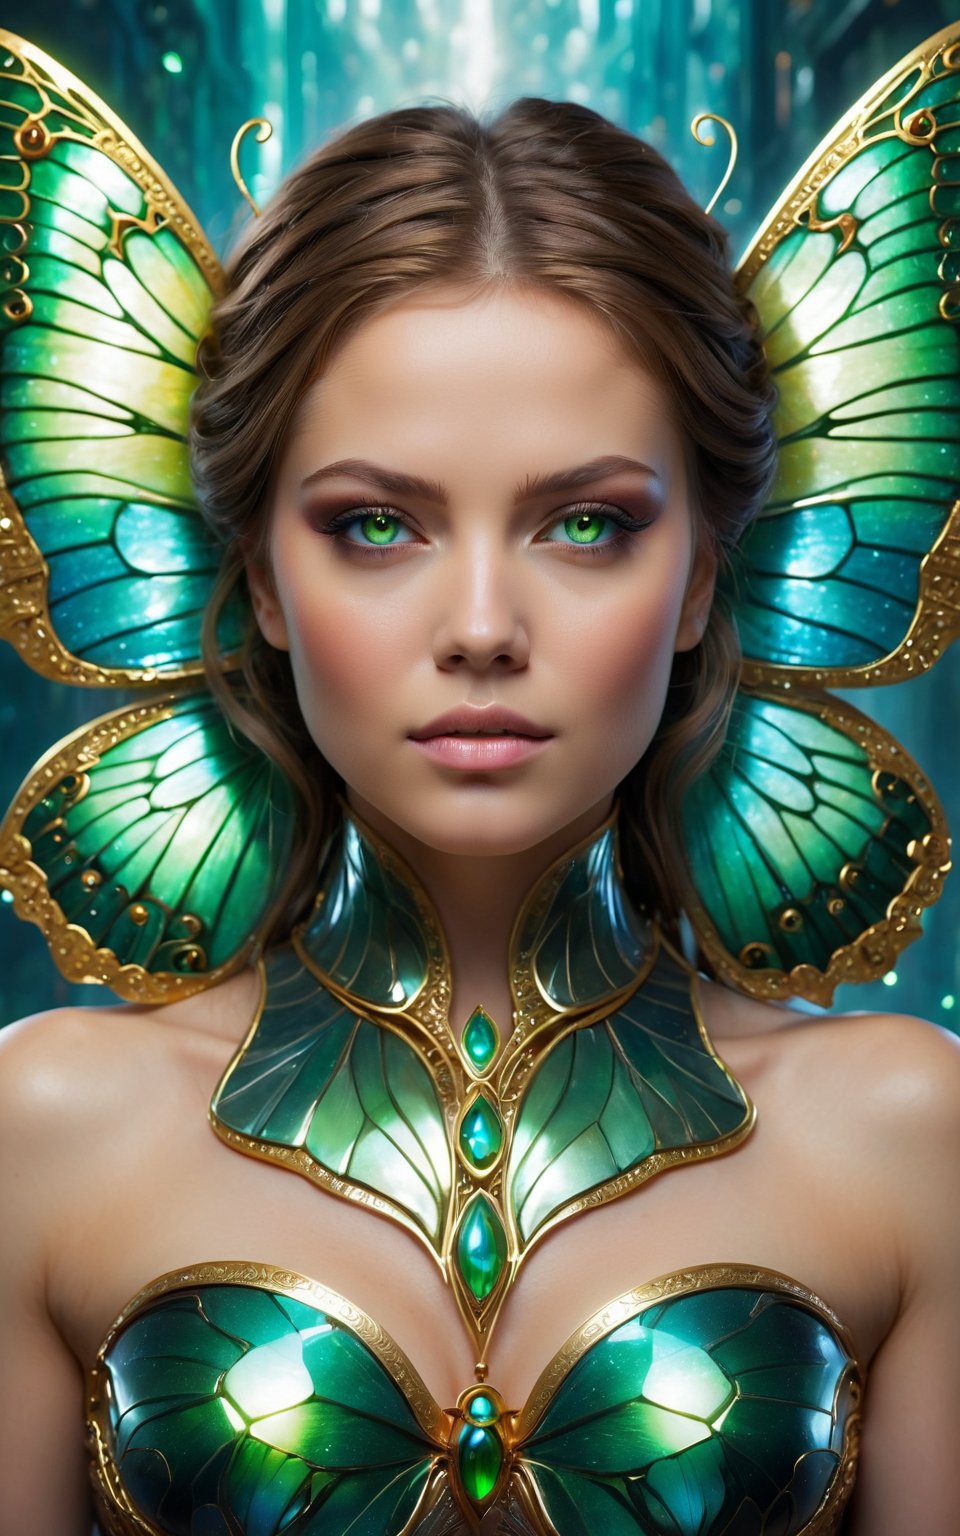 (best quality,8K,highres,masterpiece), ultra-detailed, (portrait of a stunning beauty woman, a beautiful cyborg with brown hair and sharp green eyes), an enchanting portrait capturing the beauty of a cyborg woman with striking brown hair and sharp green eyes. Her features are intricate and elegant, with every detail meticulously rendered to showcase her majestic presence. The portrait is captured through digital photography, allowing for the highest level of detail and realism. Adorning her cyborg form are delicate gold butterfly filigree accents, adding a touch of ethereal beauty to her appearance. Translucent fairy wings extend from her back, hinting at her otherworldly nature and grace. Surrounding her is a shattered glass motif, symbolizing both her fractured humanity and her resilience. This artwork captures the juxtaposition of beauty and technology, inviting the viewer to explore the depths of her character and identity. Feel free to add your own creative touches to enhance the realism and detail of this captivating portrait. 